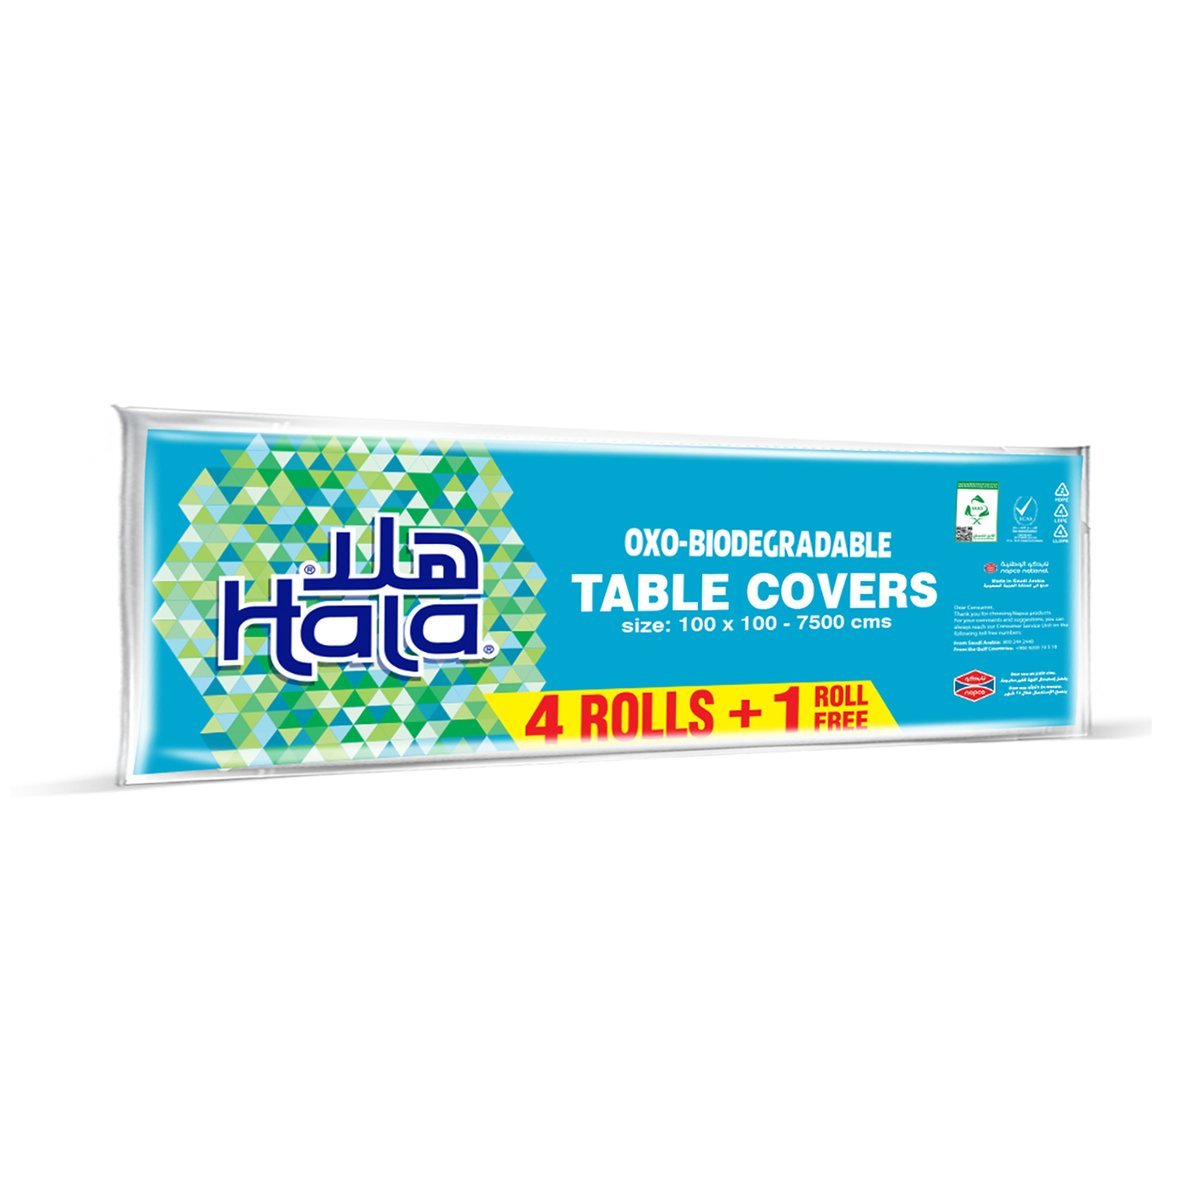 Hala Table Covers Oxo-Biodegradable Size 100 x 100  7500cm 4+1